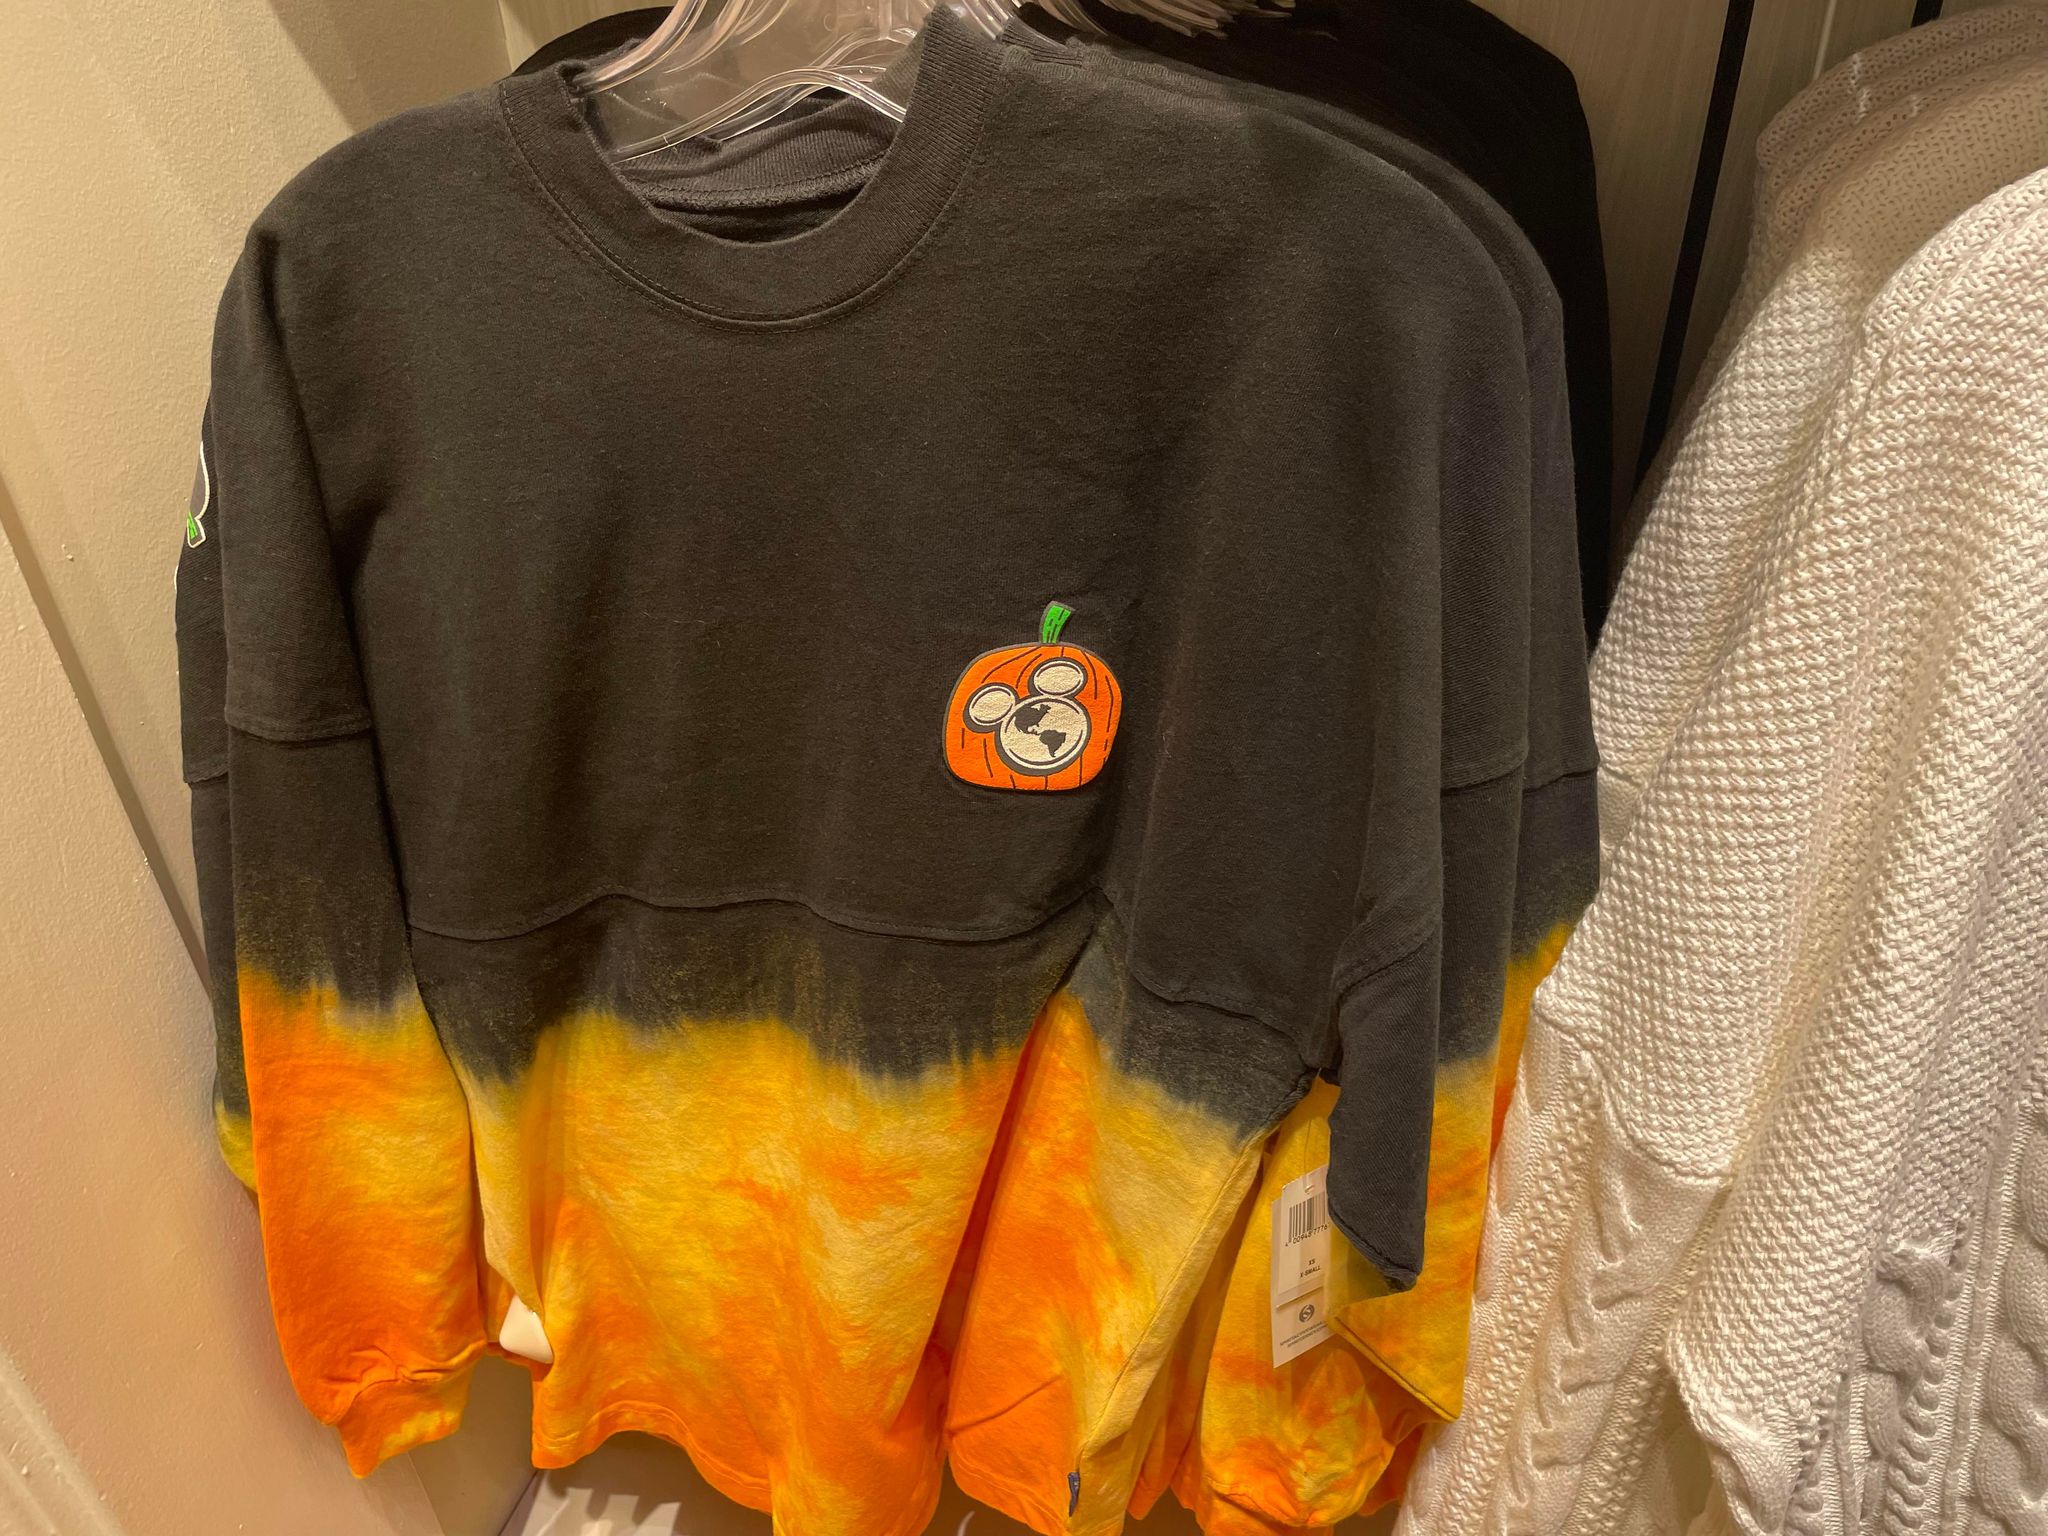 NEW Halloween Spirit Jersey Exclusively For DVC Members - MickeyBlog.com